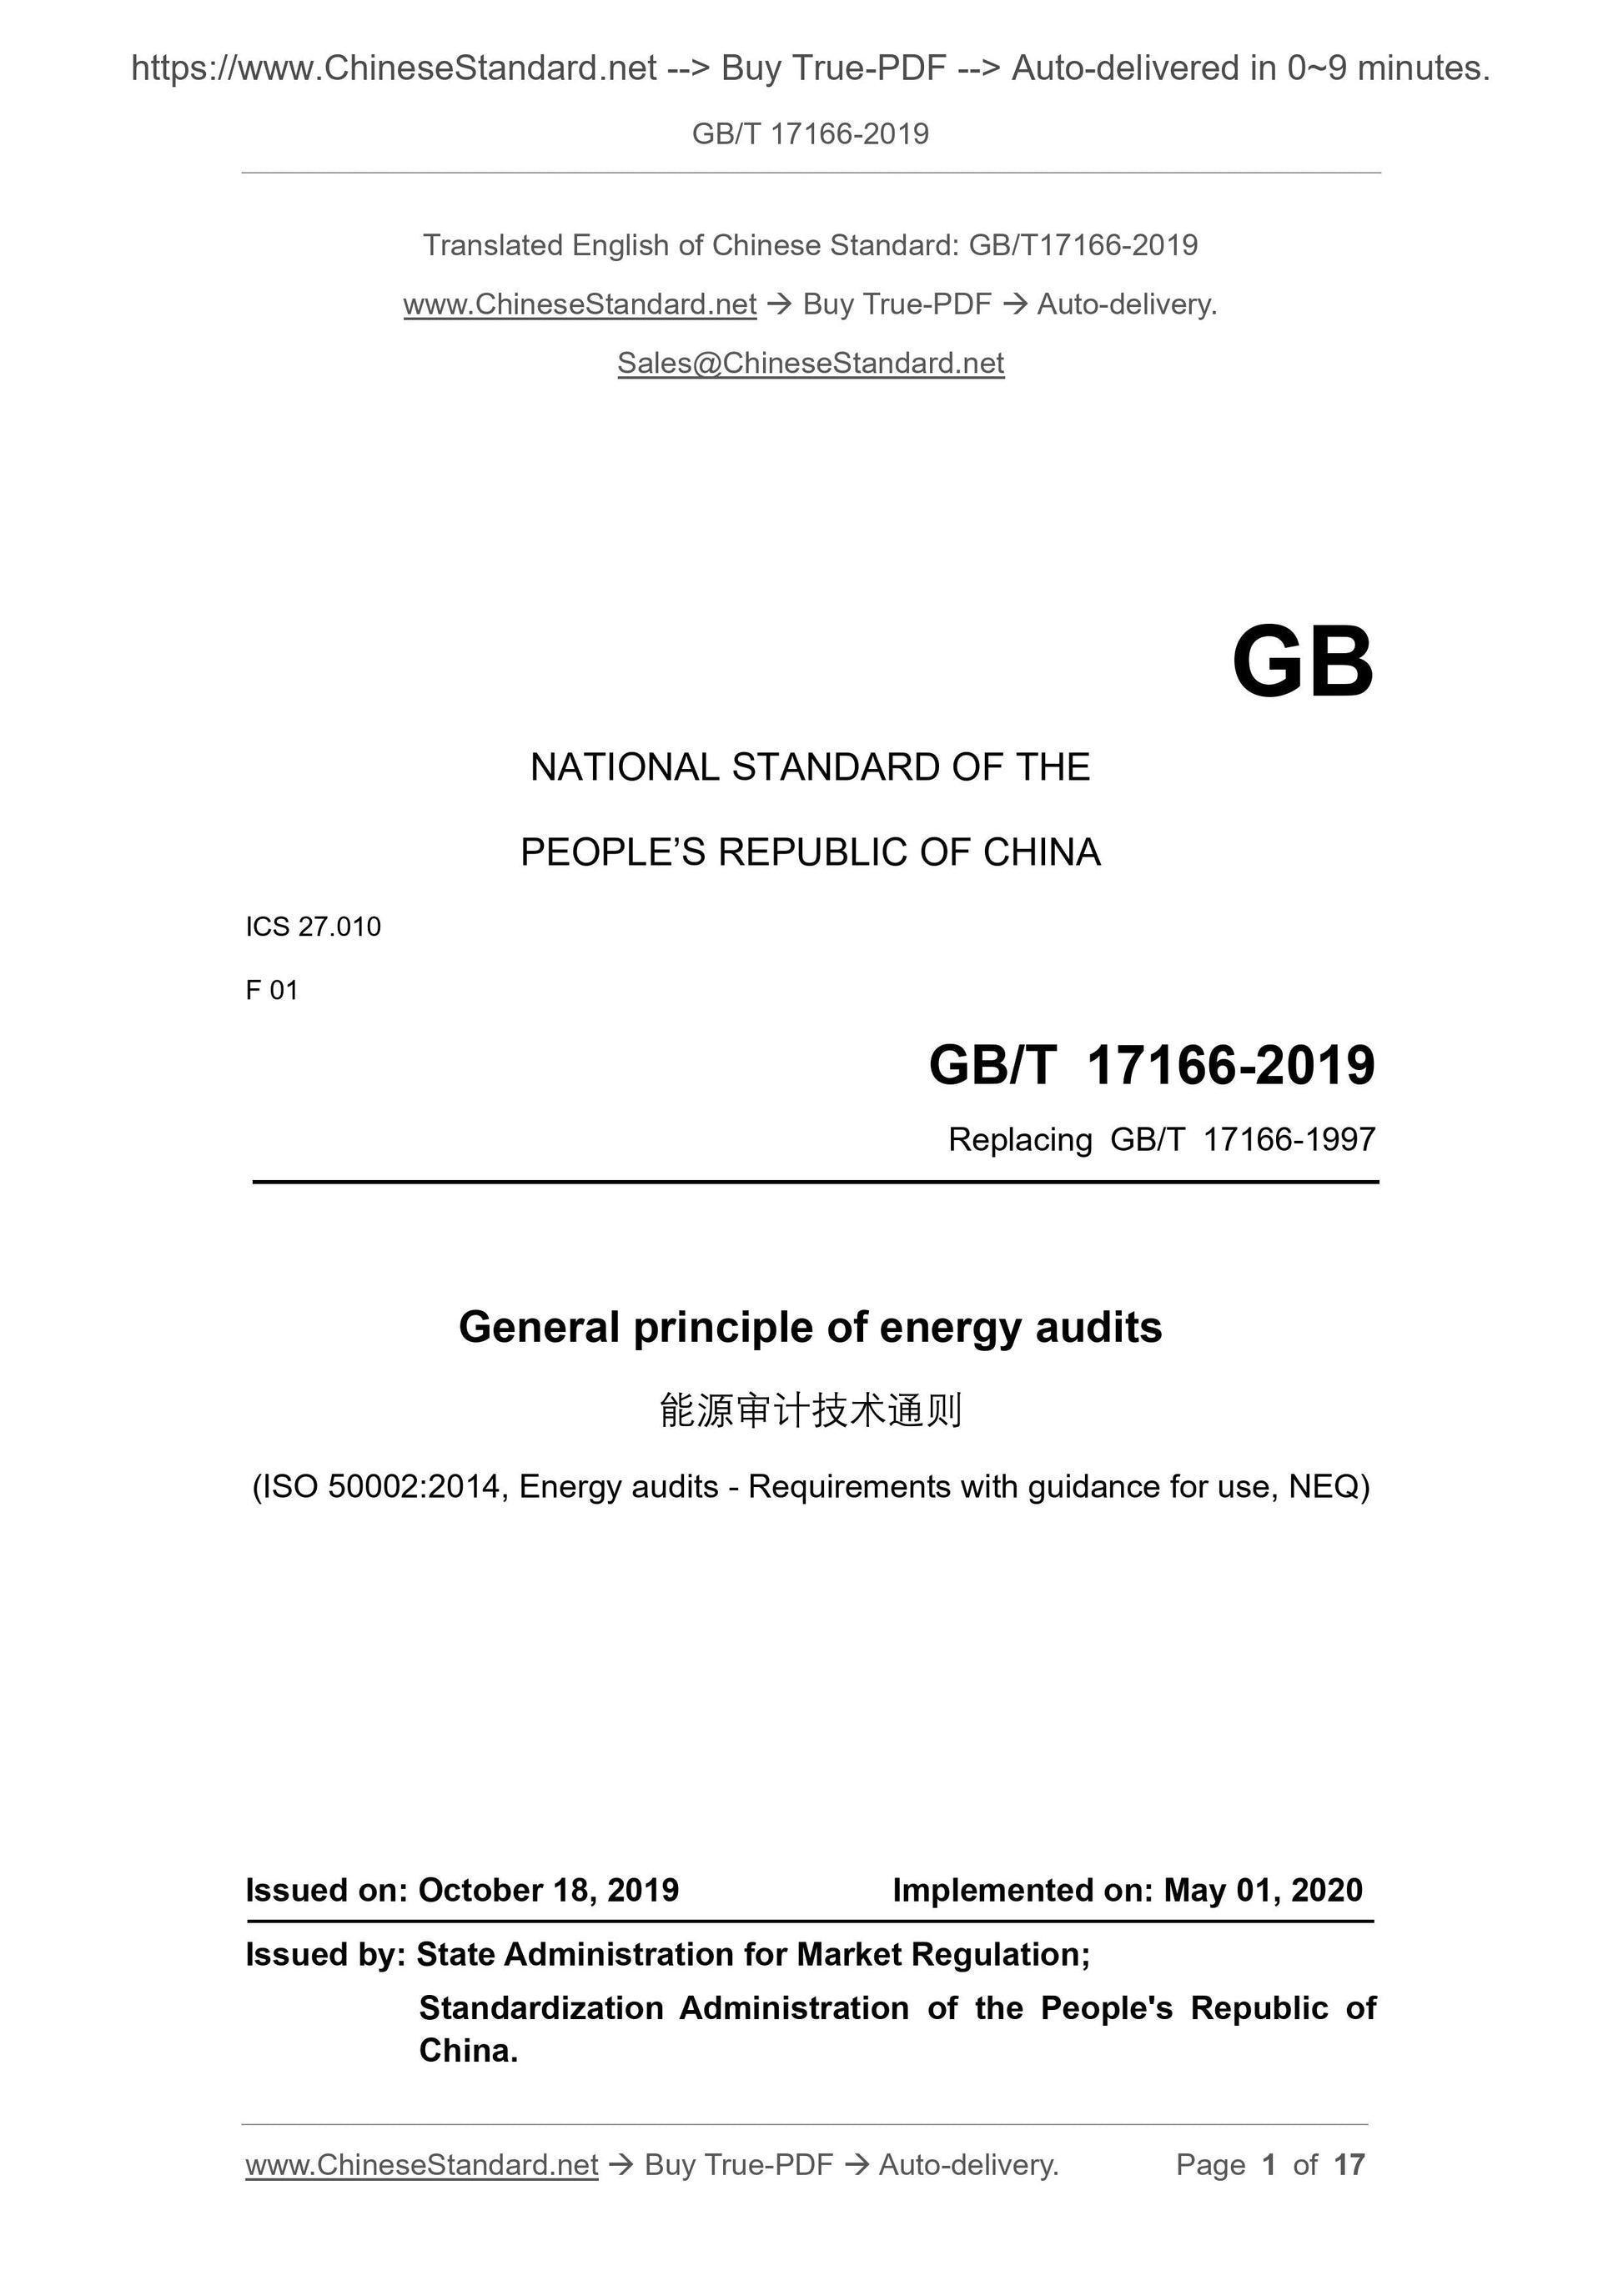 GB/T 17166-2019 Page 1